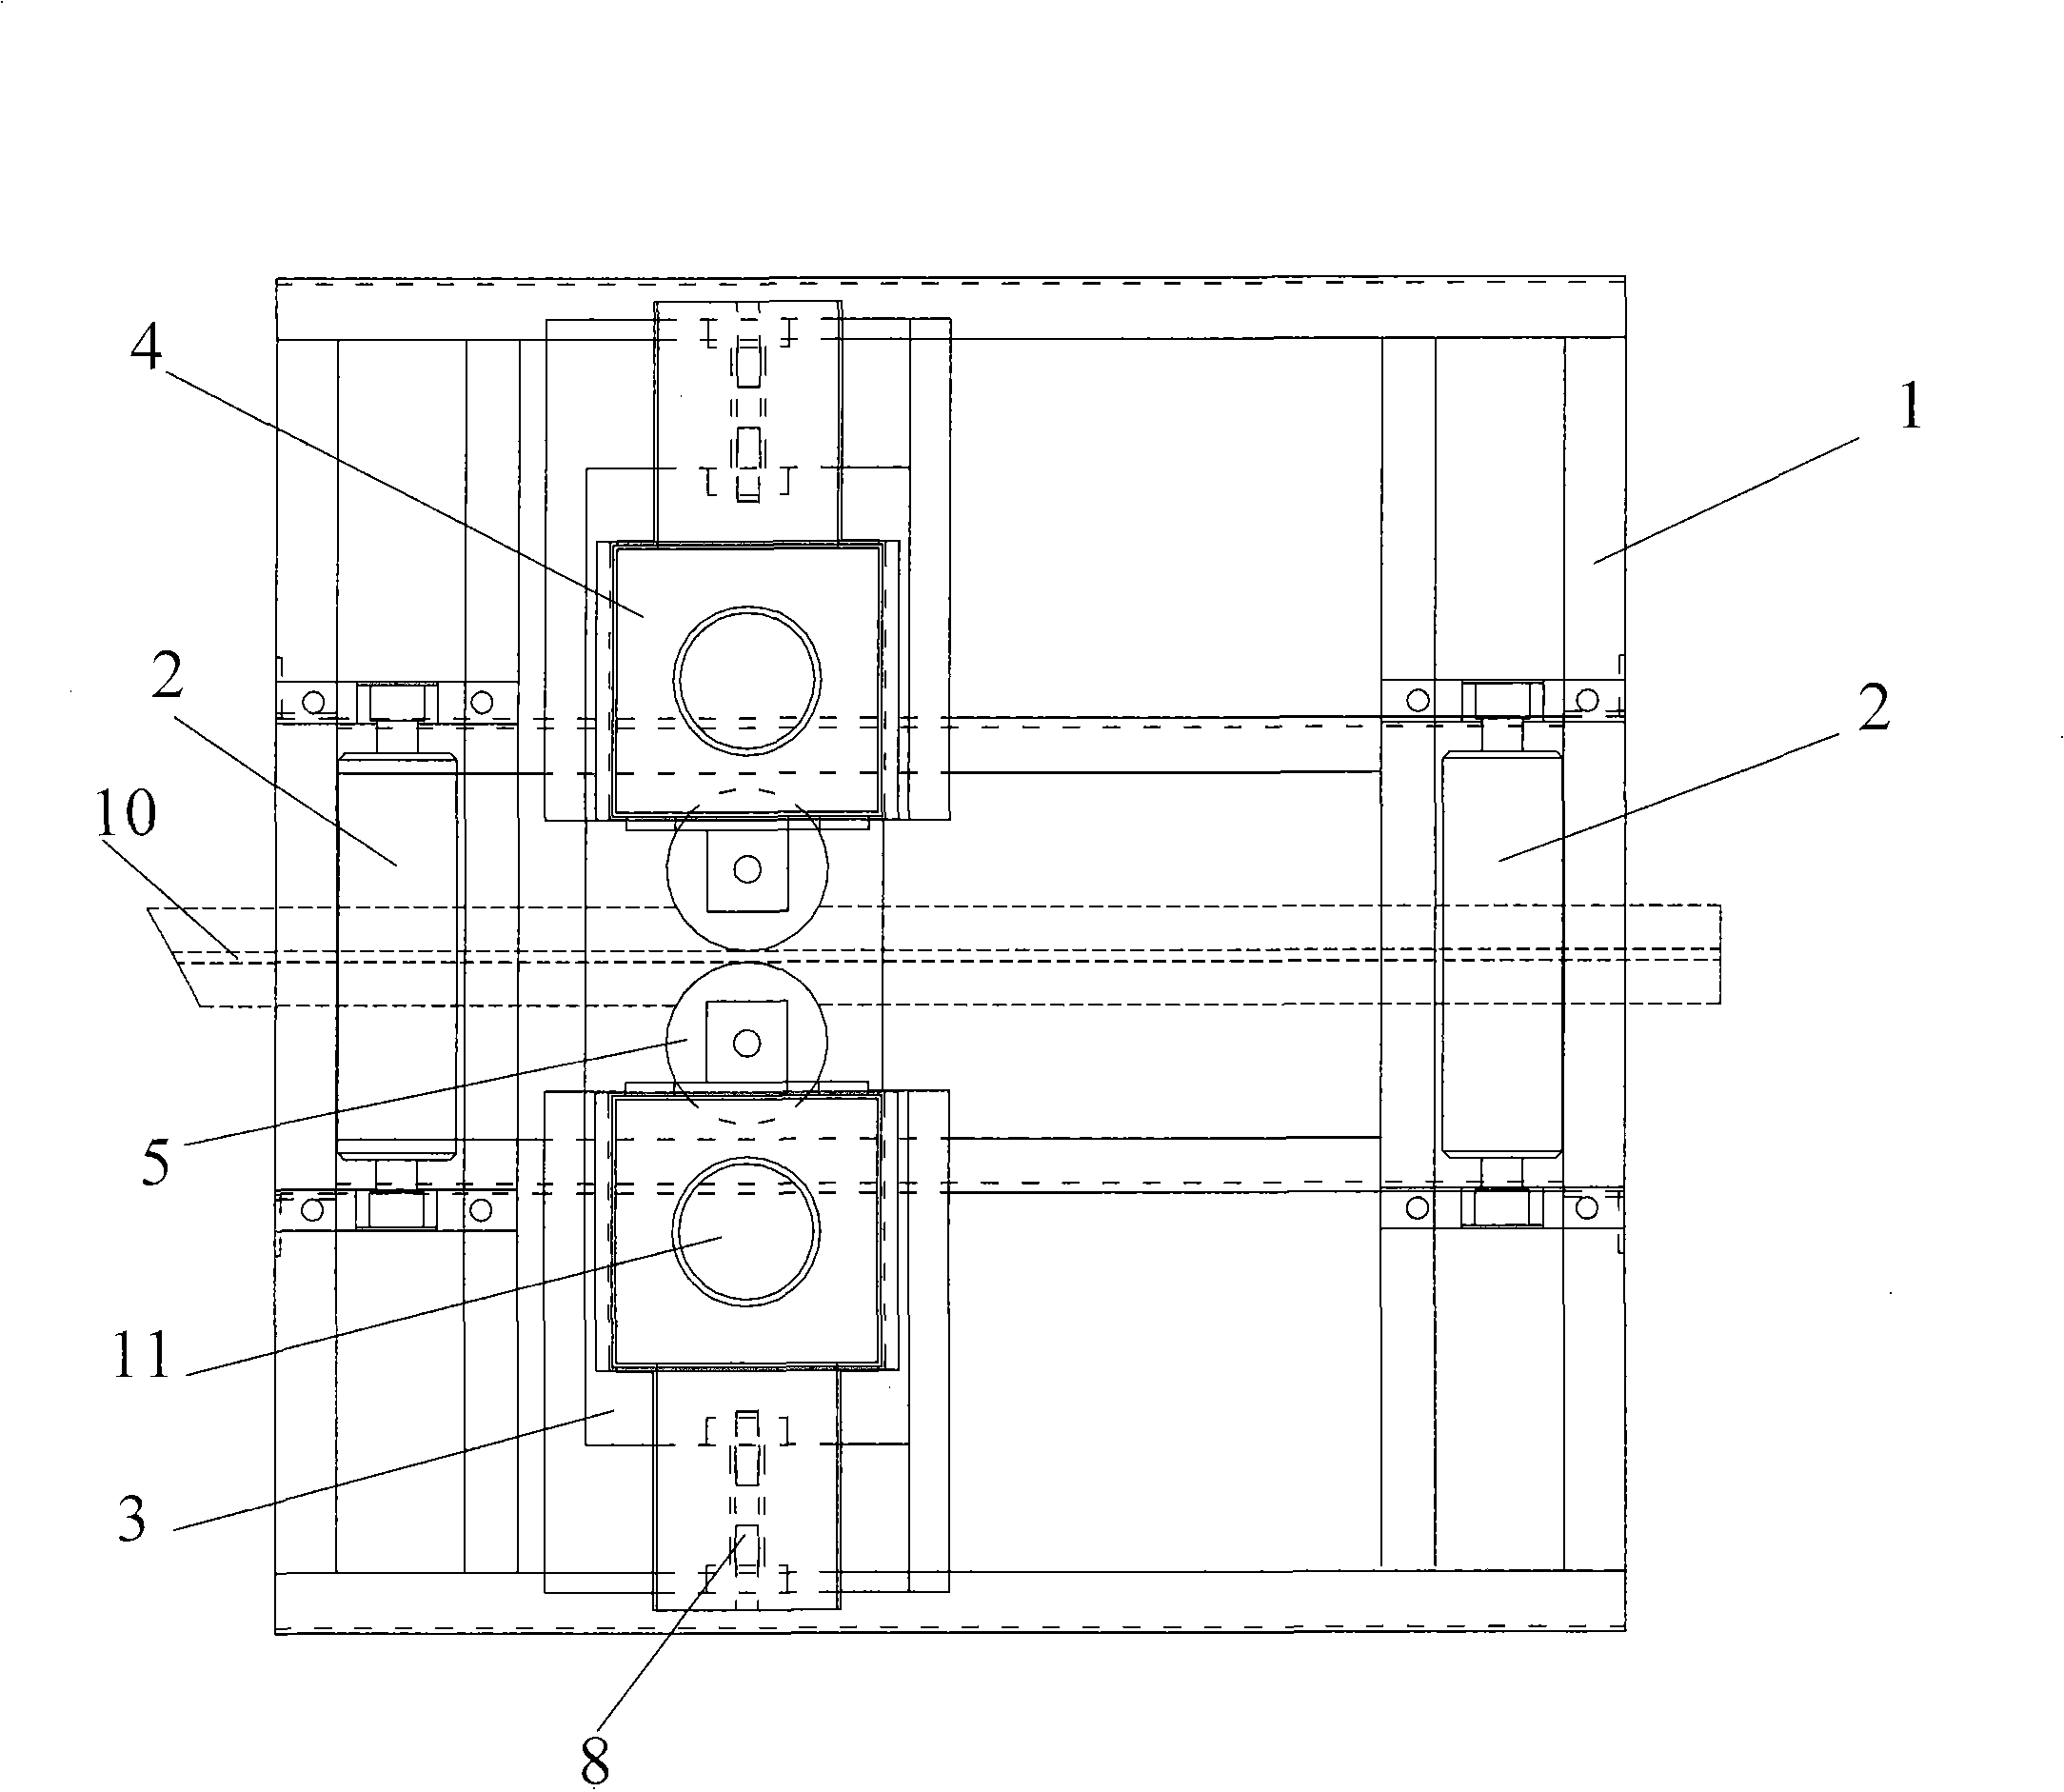 Anticorrosive oil automatic painting apparatus for adjustable rails